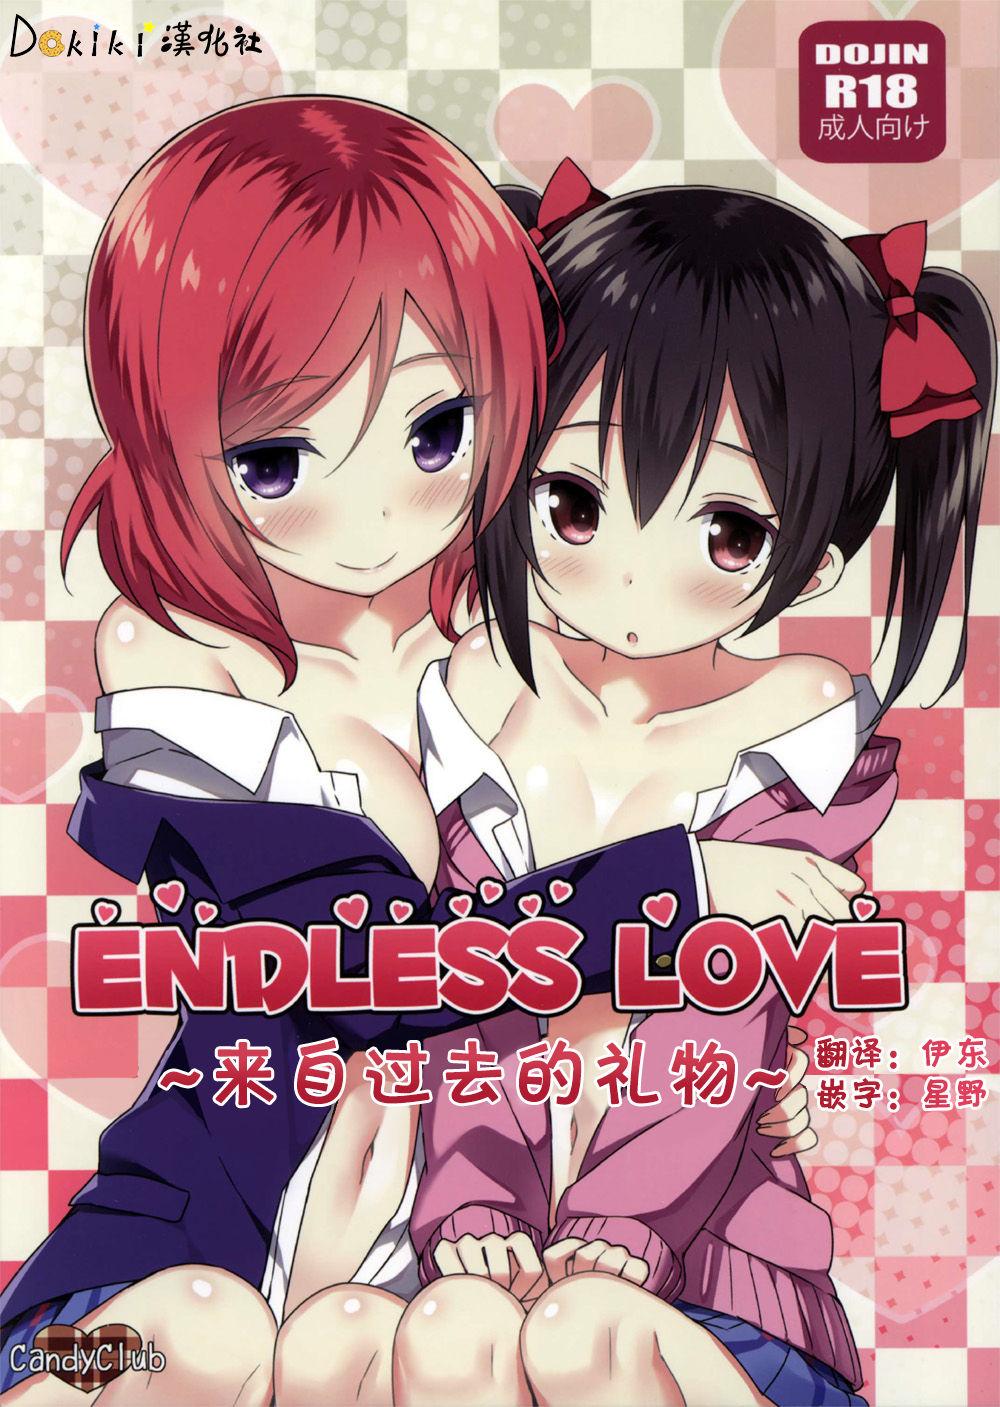 Exposed Endless Love - Love live Baile - Page 1